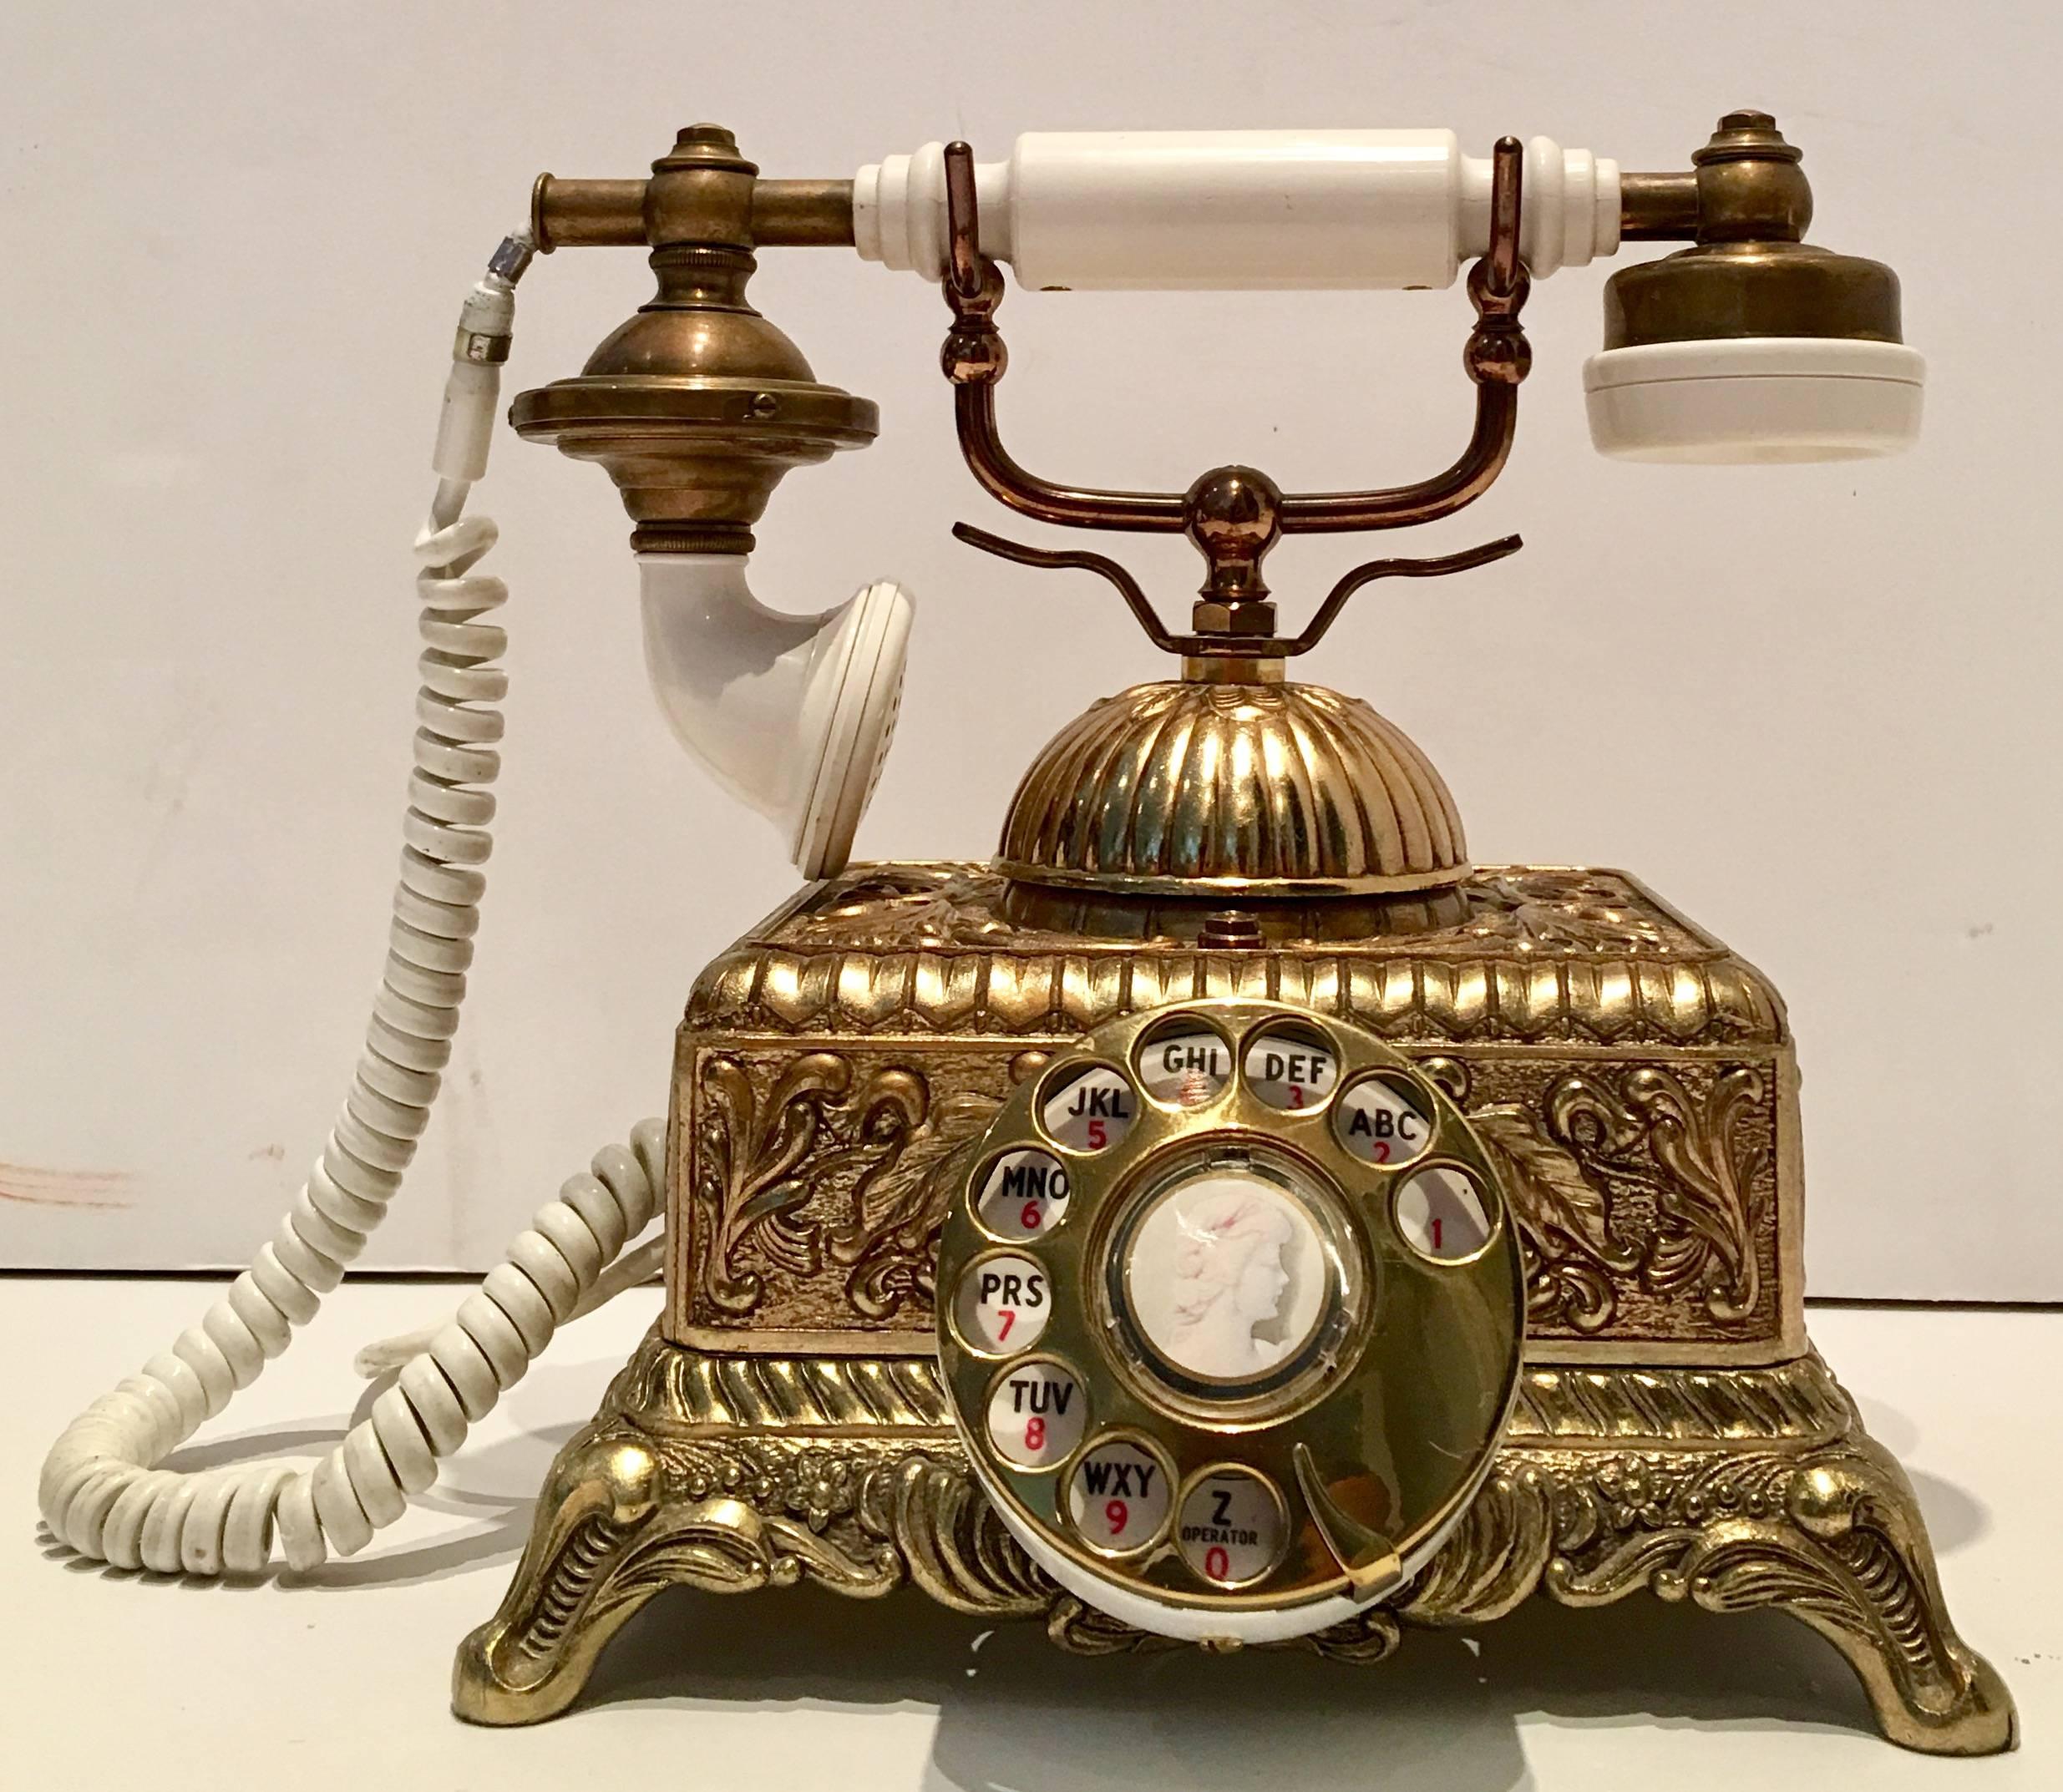 Vintage Illinois Bell Telephone French style cameo rotary reposse telephone. Features a gilt reposse Art Nouveau style pattern with a figural bell at the top. Rotary dial has a photo image of a female right facing Victorian cameo. Fully operational